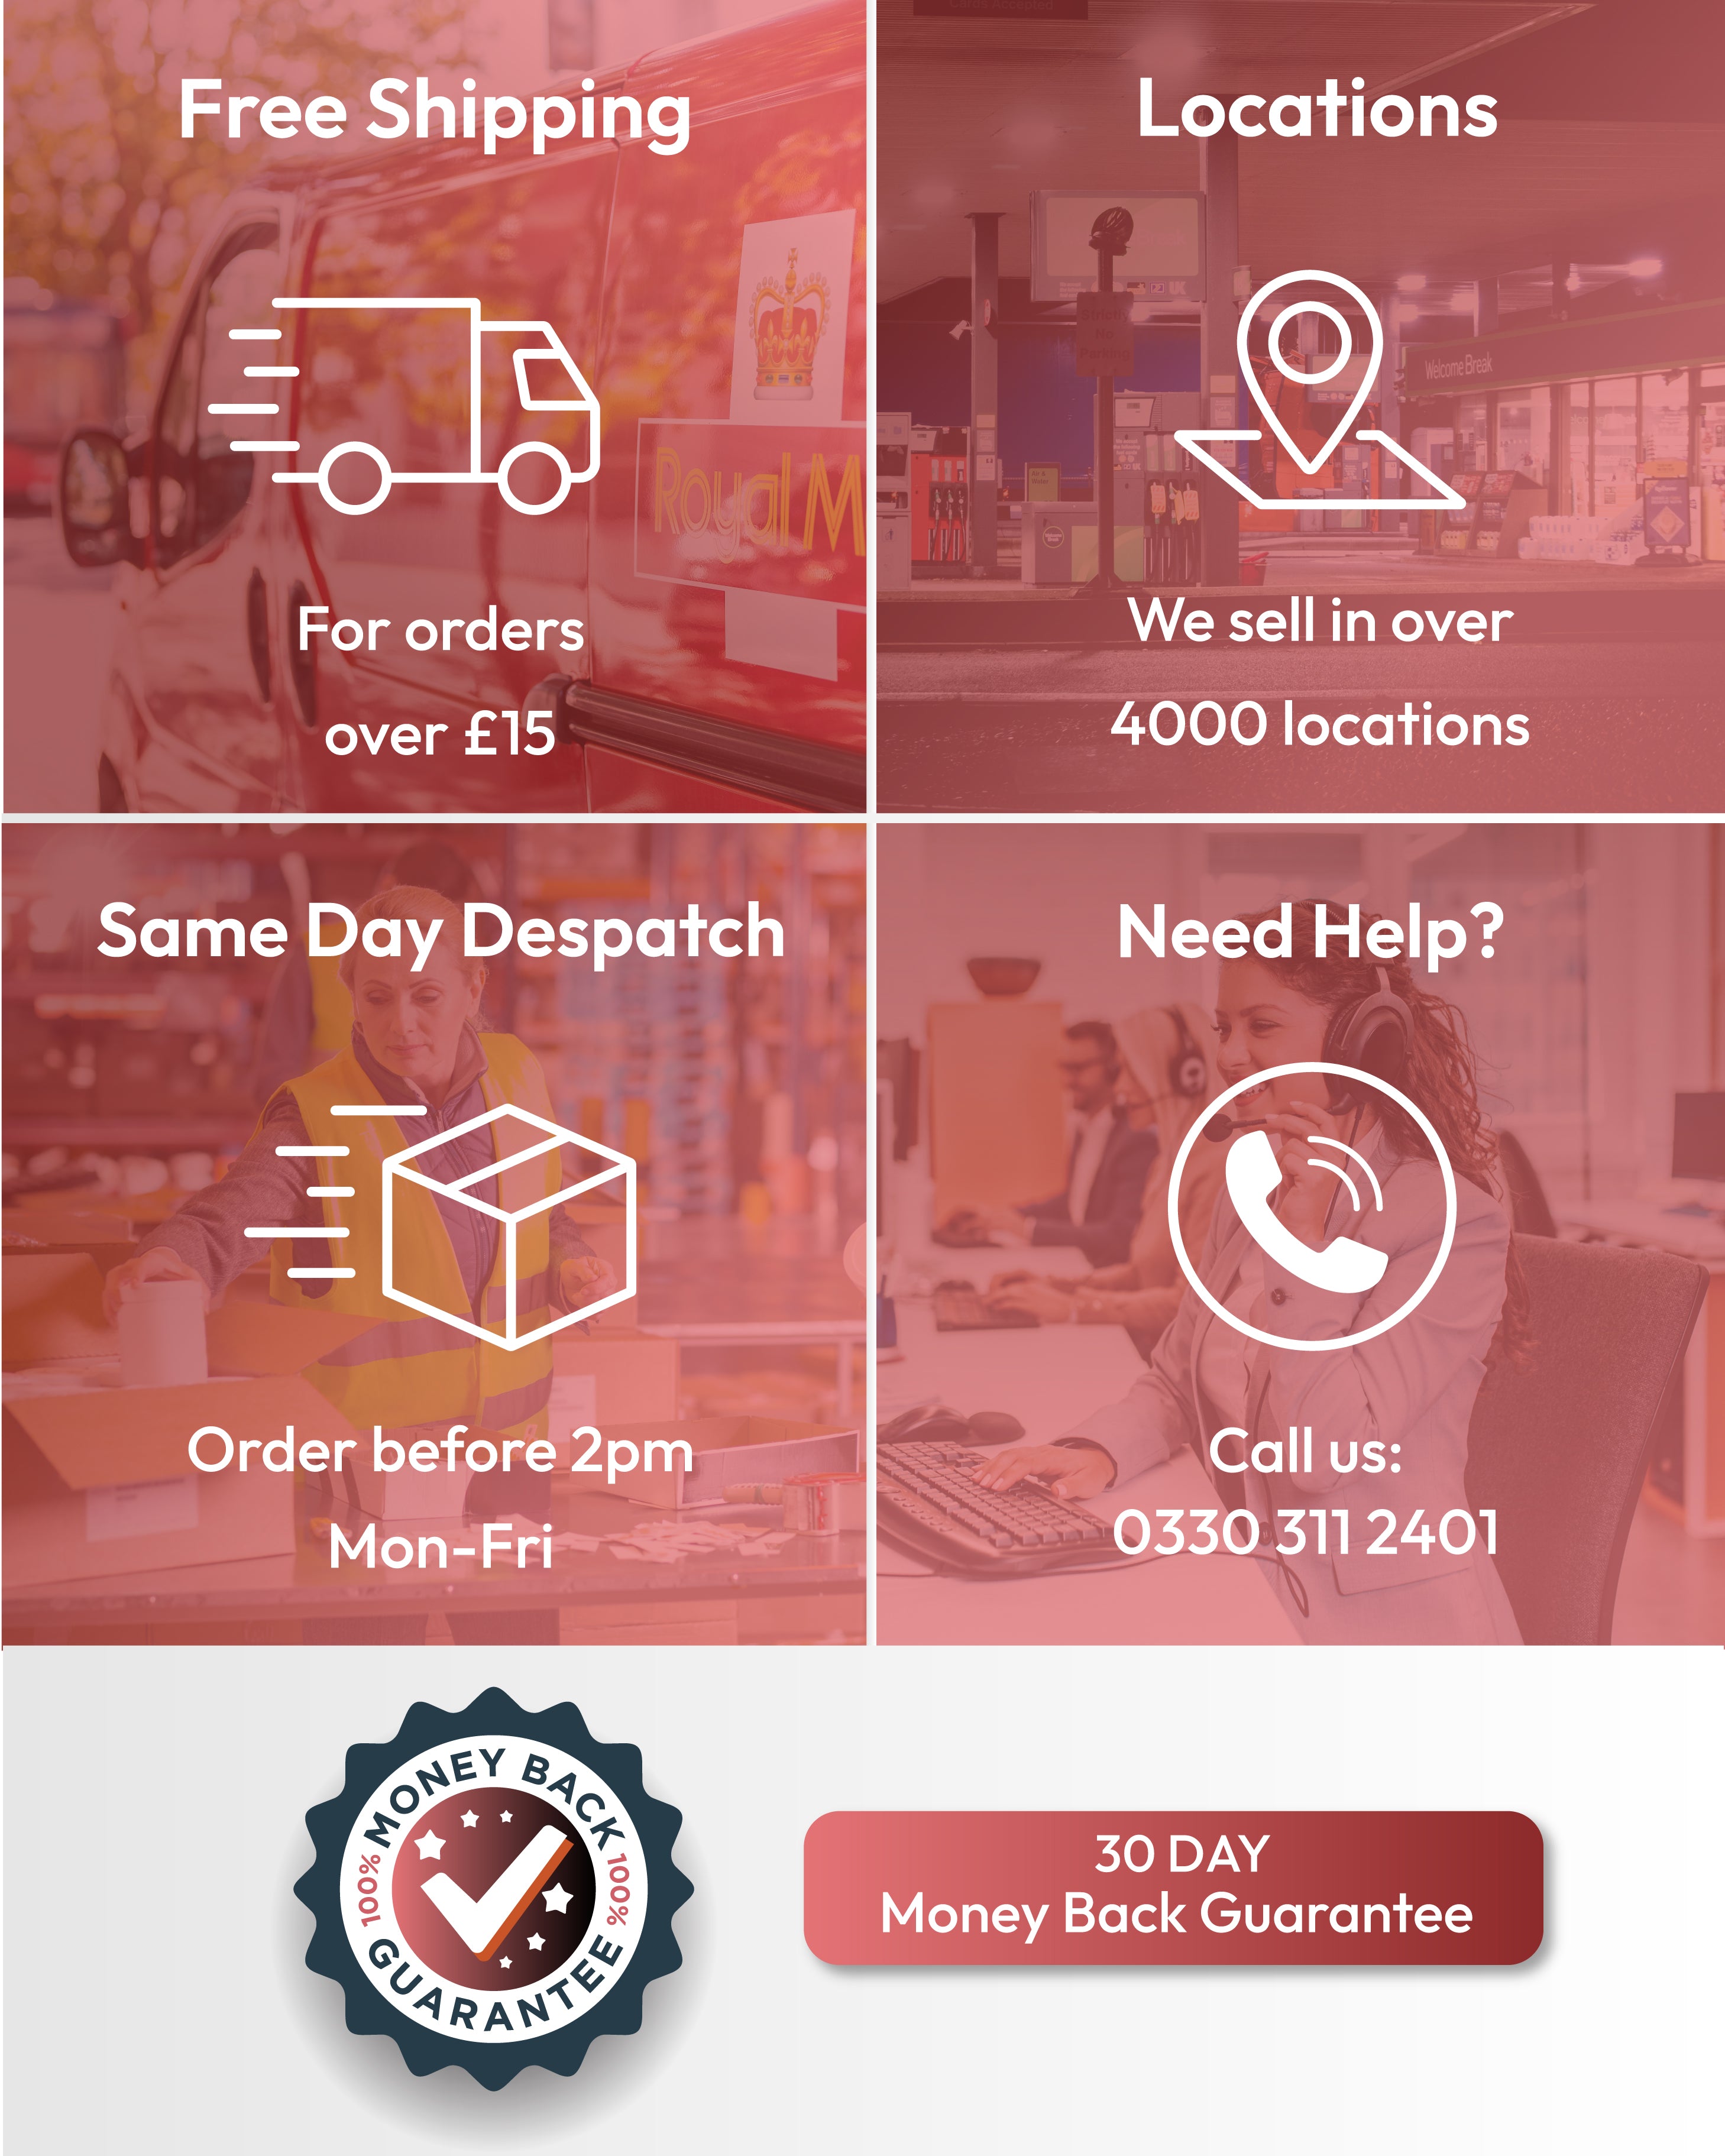 Shop with confidence with DSL. Free delivery, numerous locations, same day dispatch and excellent customer service. 30 day money back guarantee.